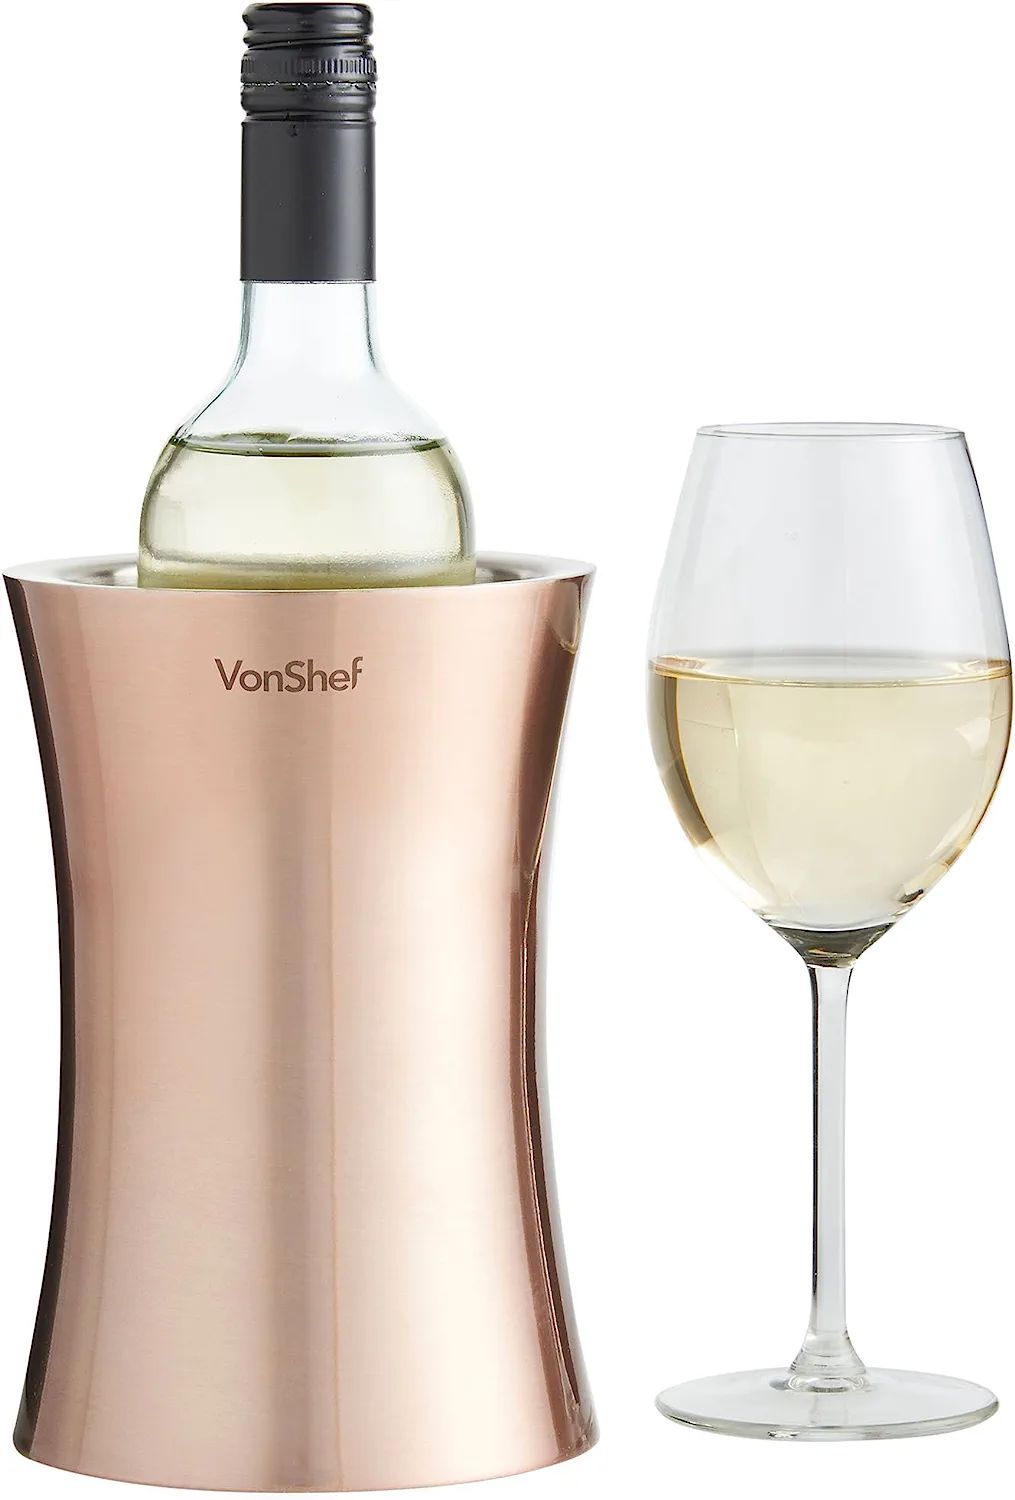 VonShef Copper Wine Bottle Cooler Chiller, Stainless Steel, Double Walled Insulated, Stemless Hol... | Amazon (US)